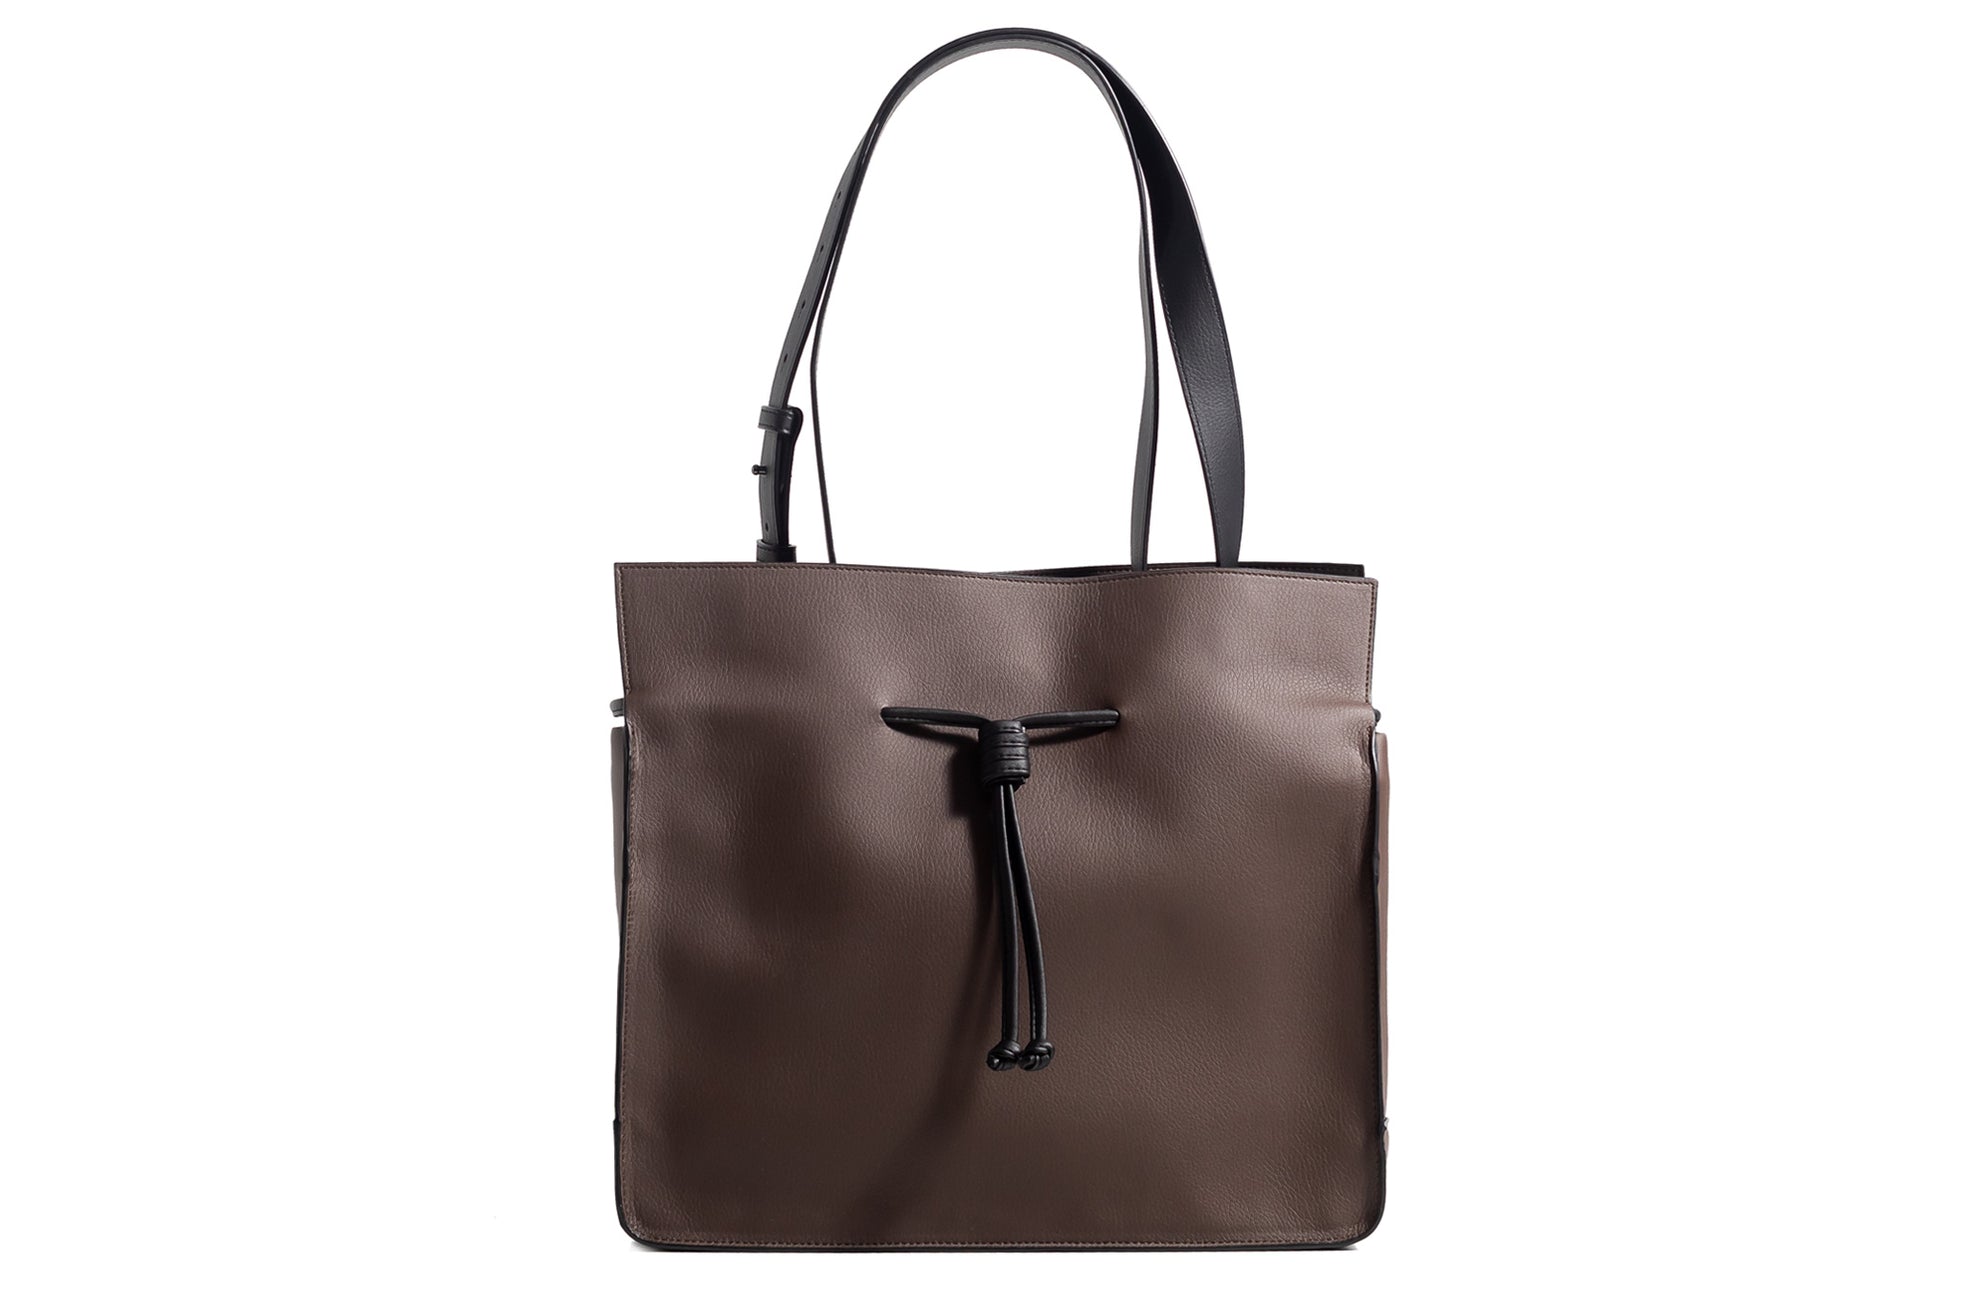 The Medium Shopper in Technik in Taupe and Black image 